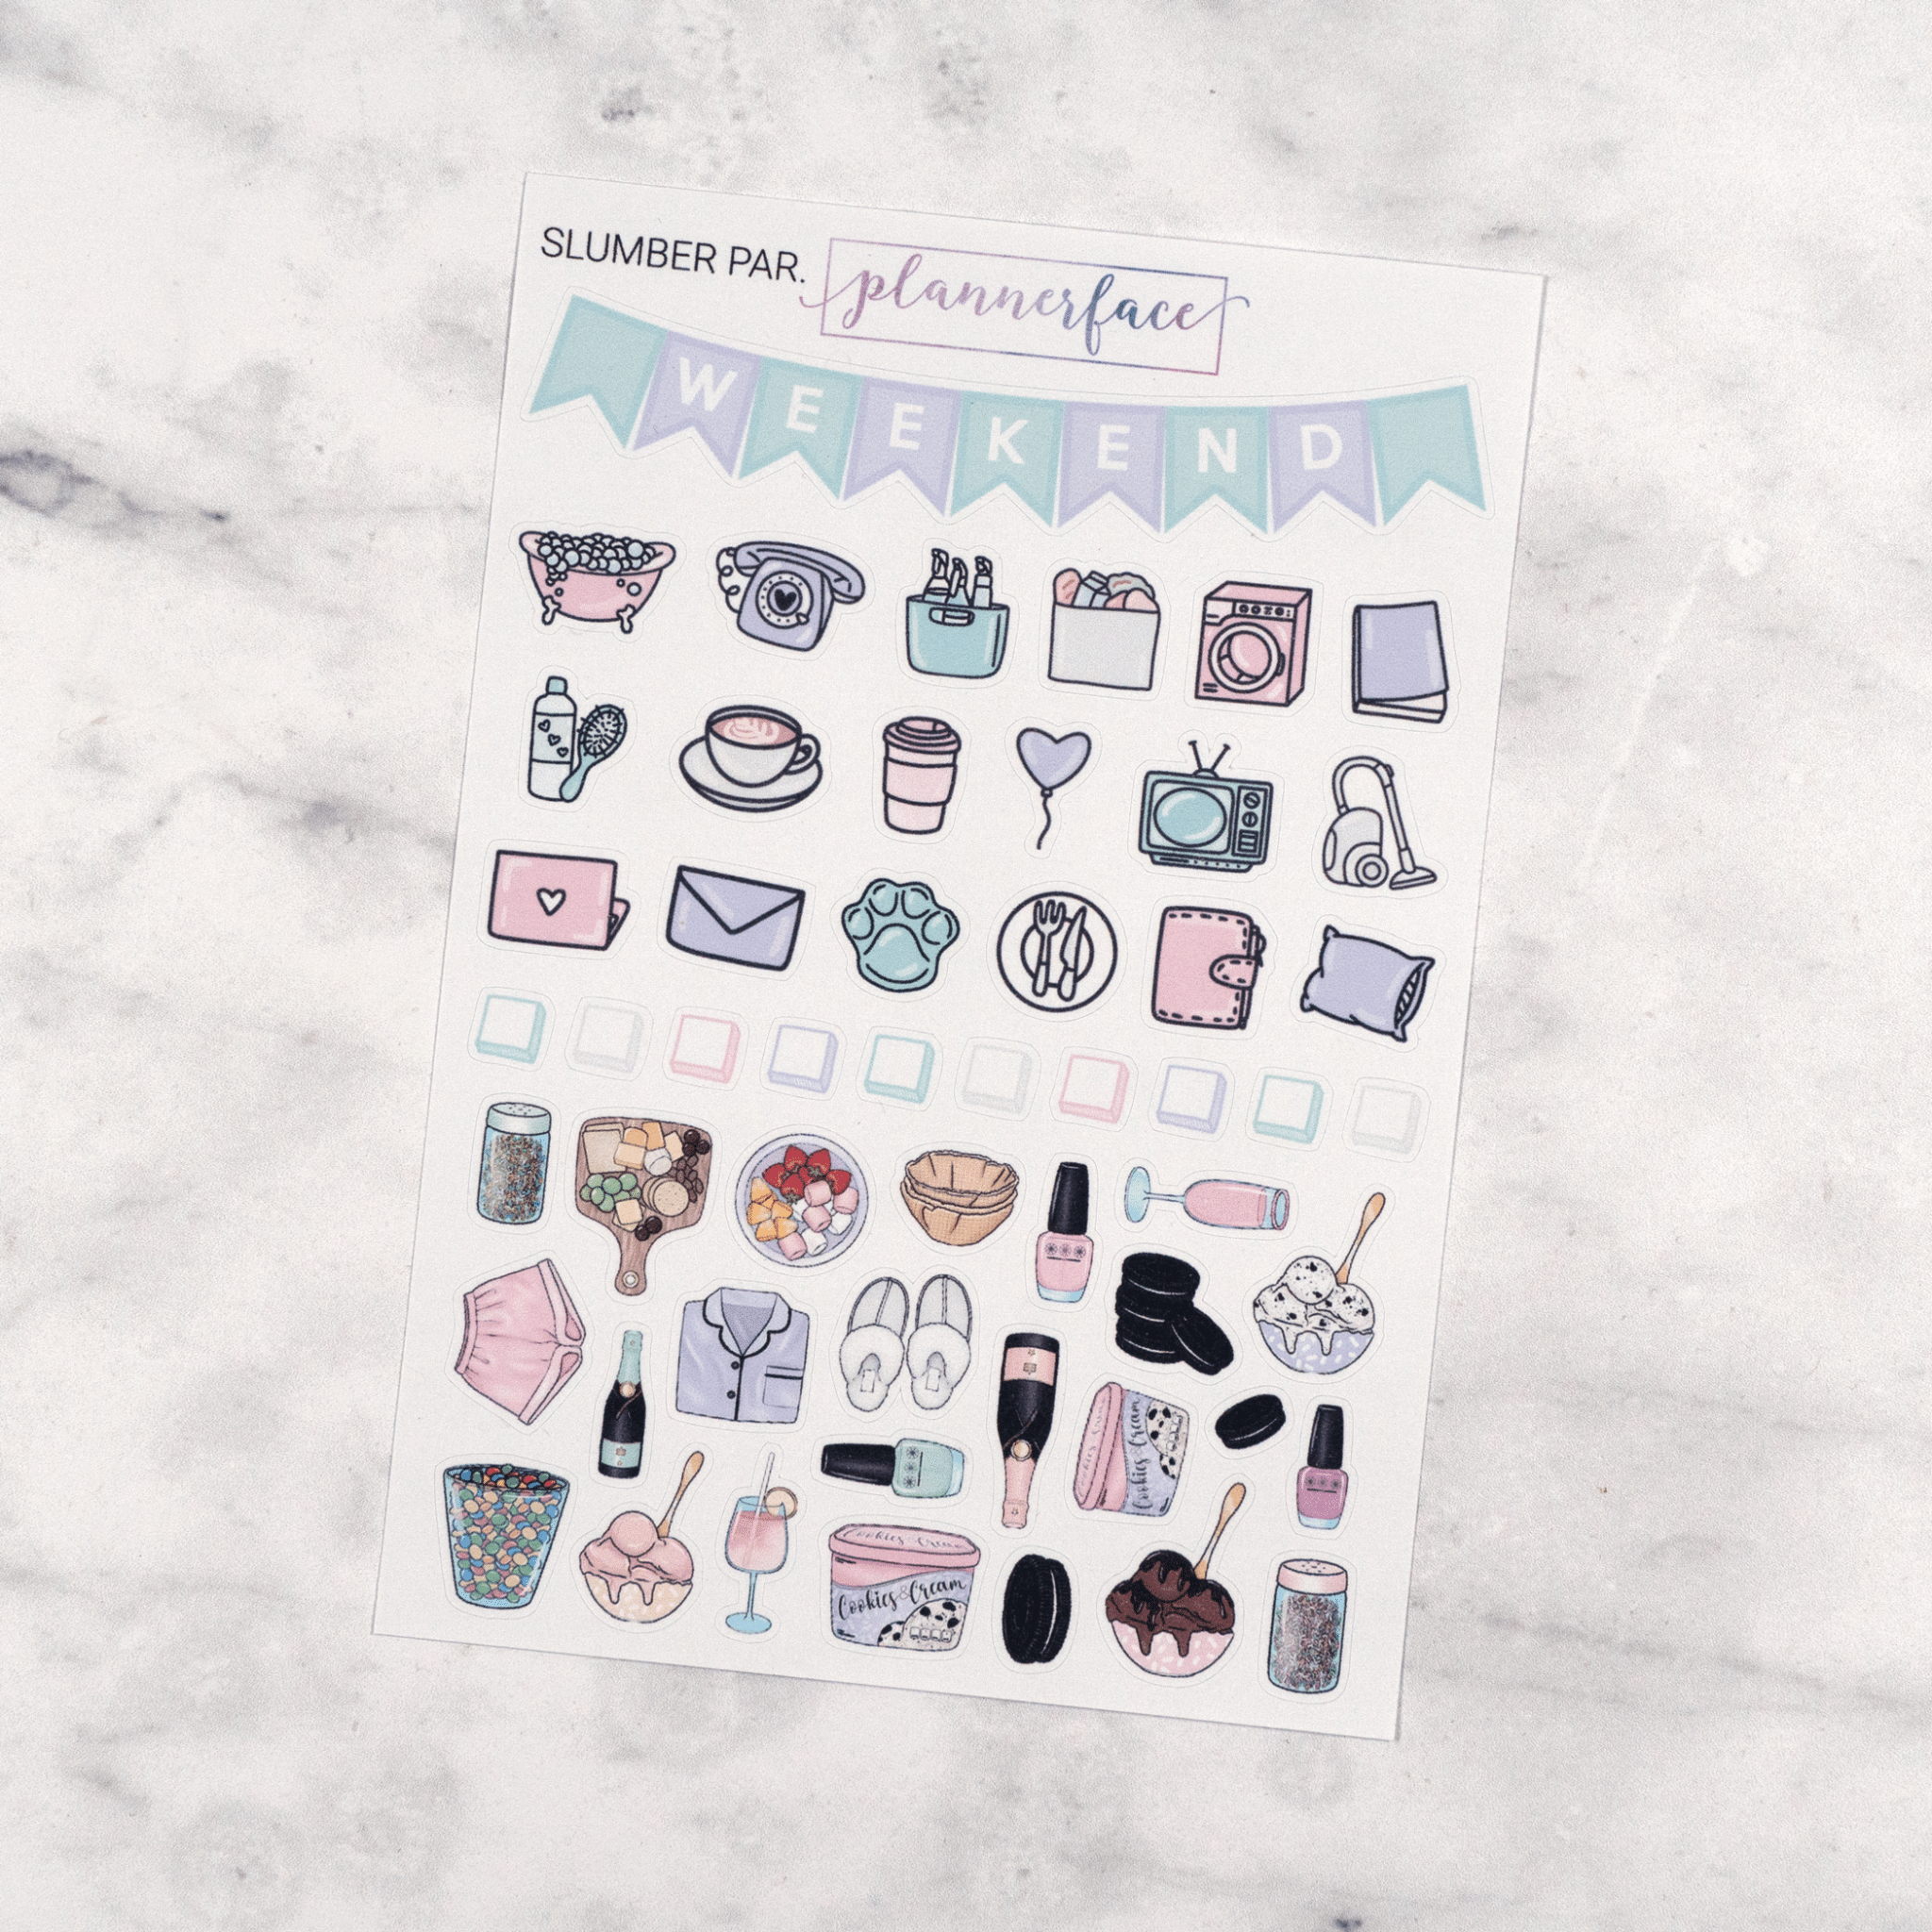 Slumber Party Weekly Kit by Plannerface